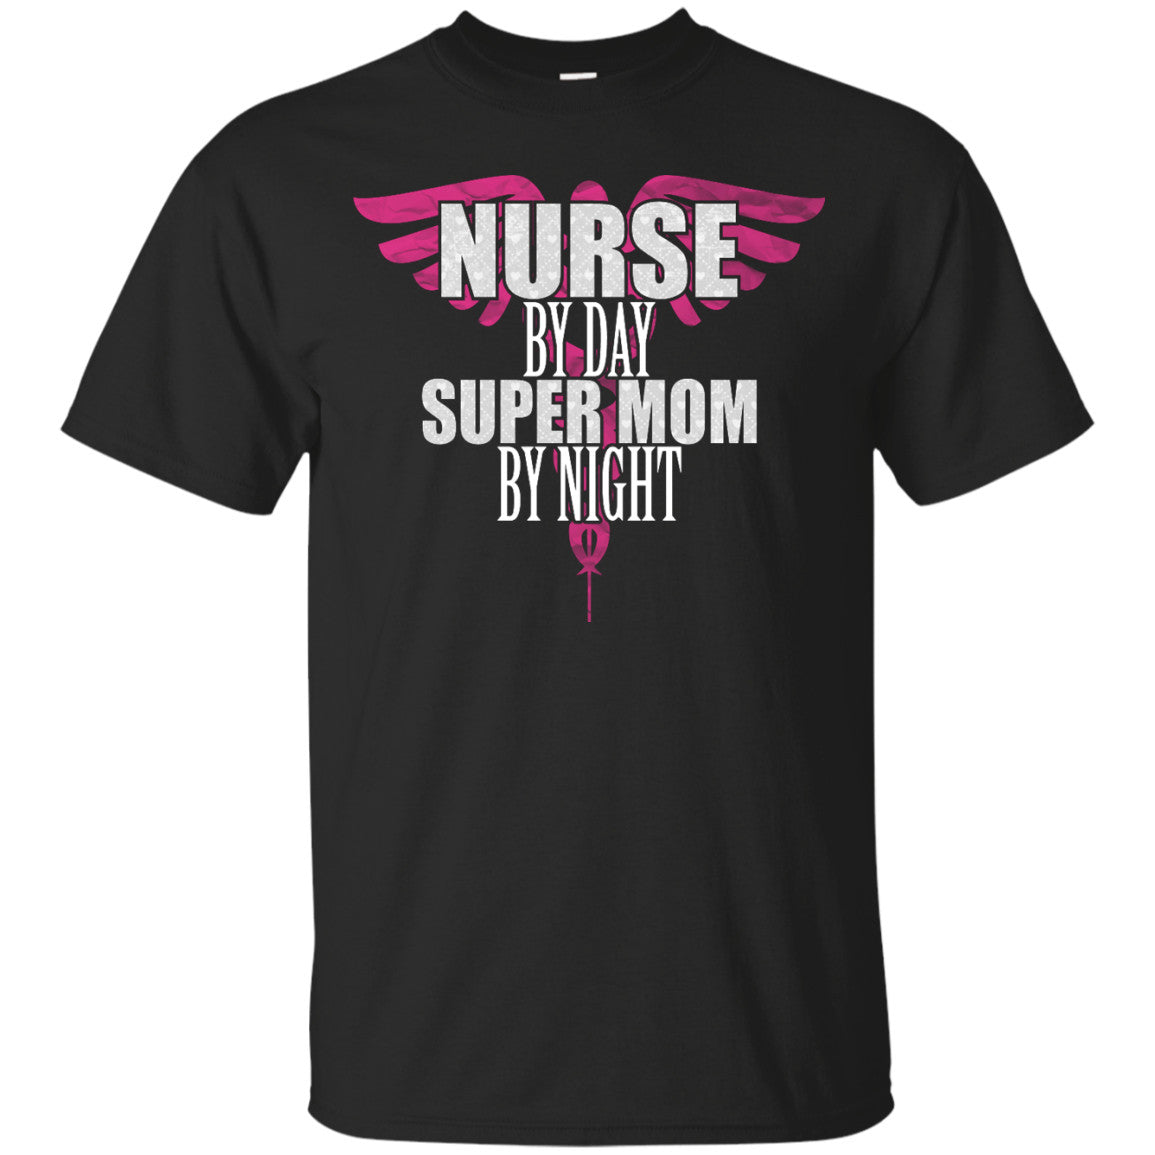 Nurse By Day Super Mom By Night Shirts - GoneBold.gift